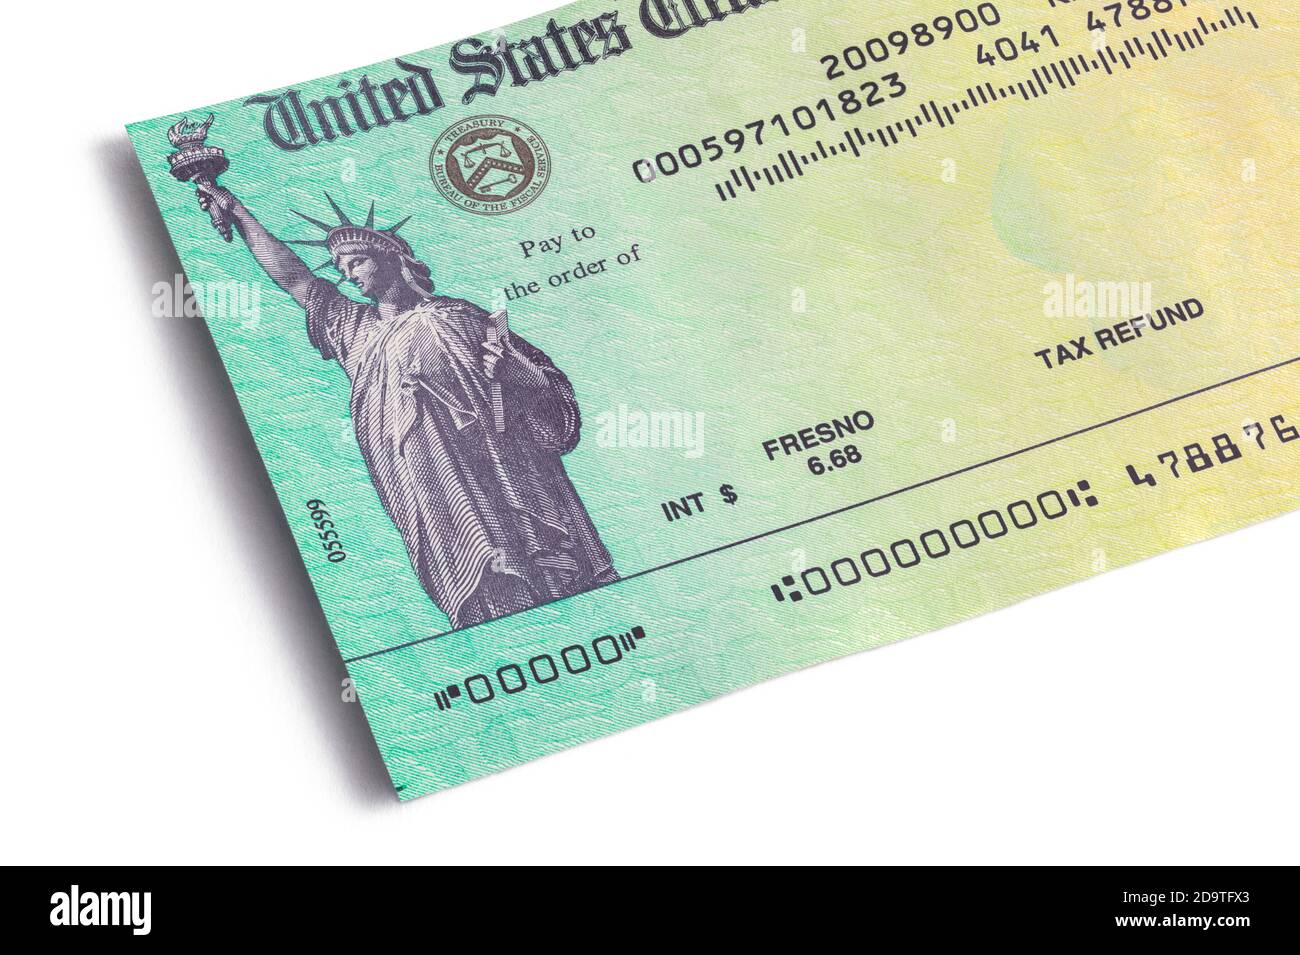 Federal Tax Refund Check Close Up Cut Out auf Weiß. Stockfoto